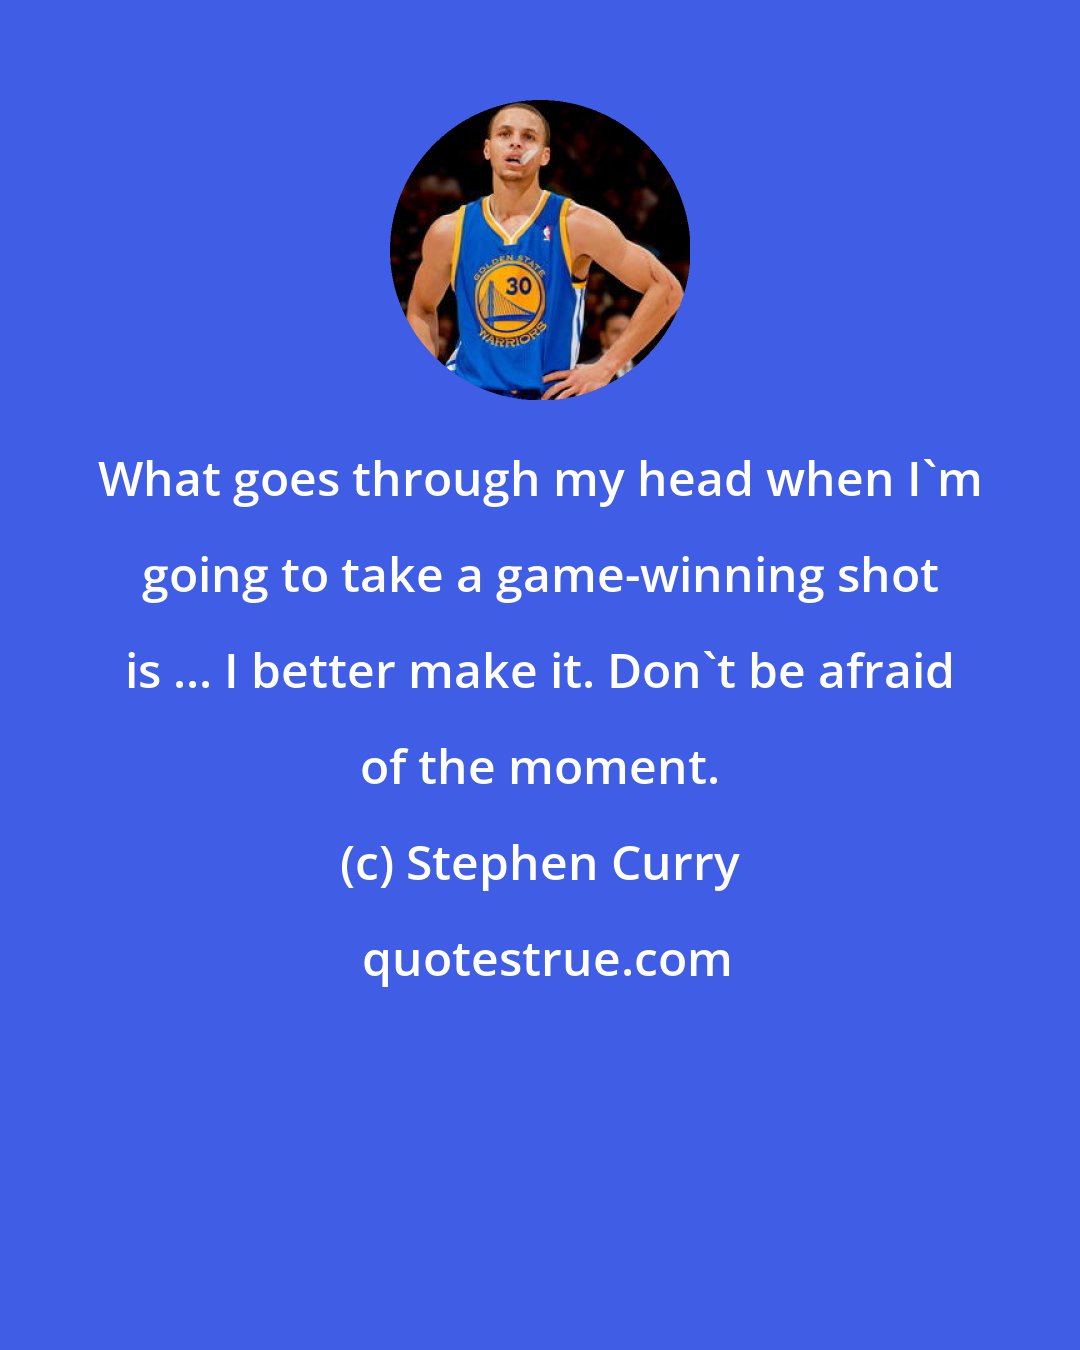 Stephen Curry: What goes through my head when I'm going to take a game-winning shot is ... I better make it. Don't be afraid of the moment.